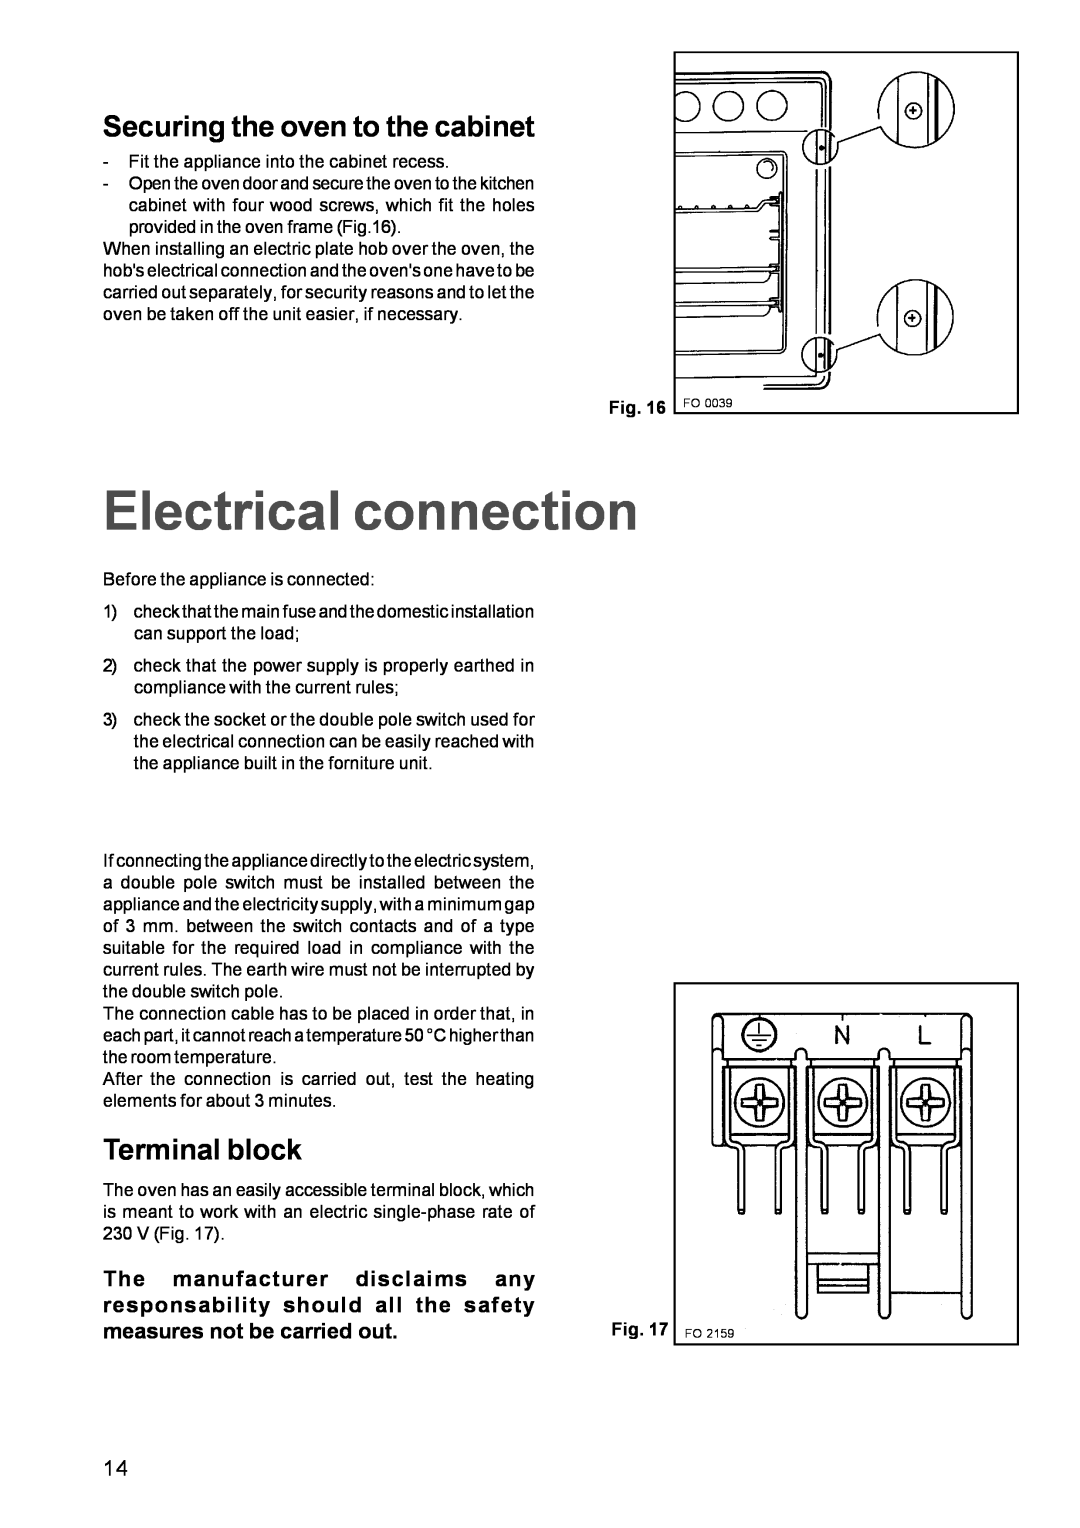 Zanussi Oven manual Electrical connection, Securing the oven to the cabinet, Terminal block, The manufacturer disclaims 